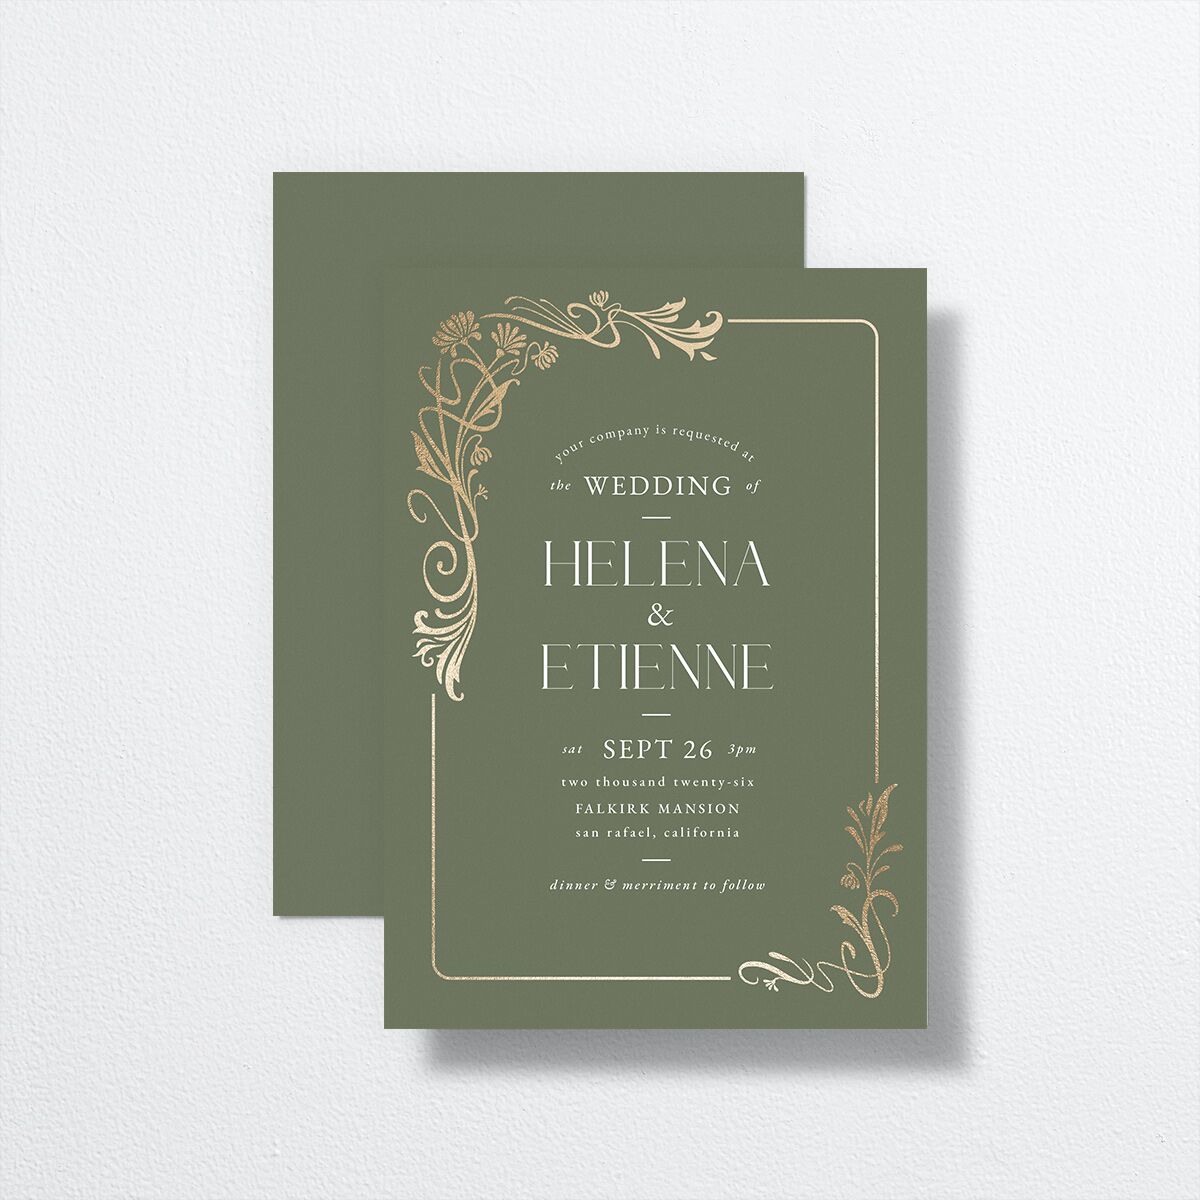 Nouveau Frame Wedding Invitations front-and-back in green